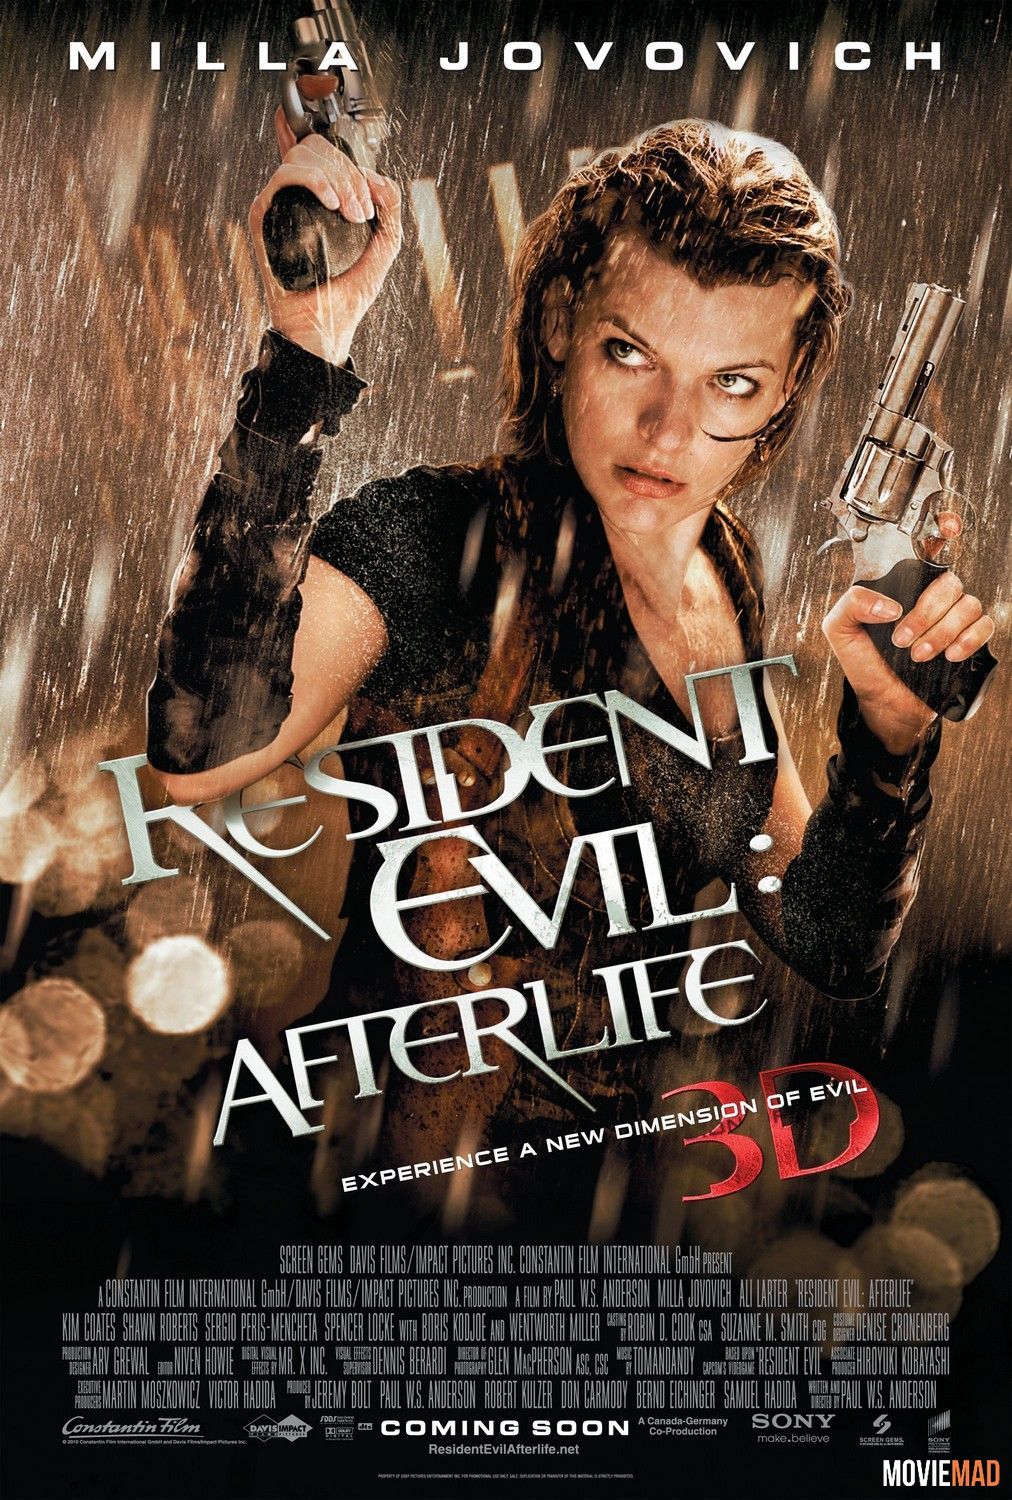 full moviesResident Evil: Afterlife 2010 BluRay Dual Audio Hindi 720p 480p